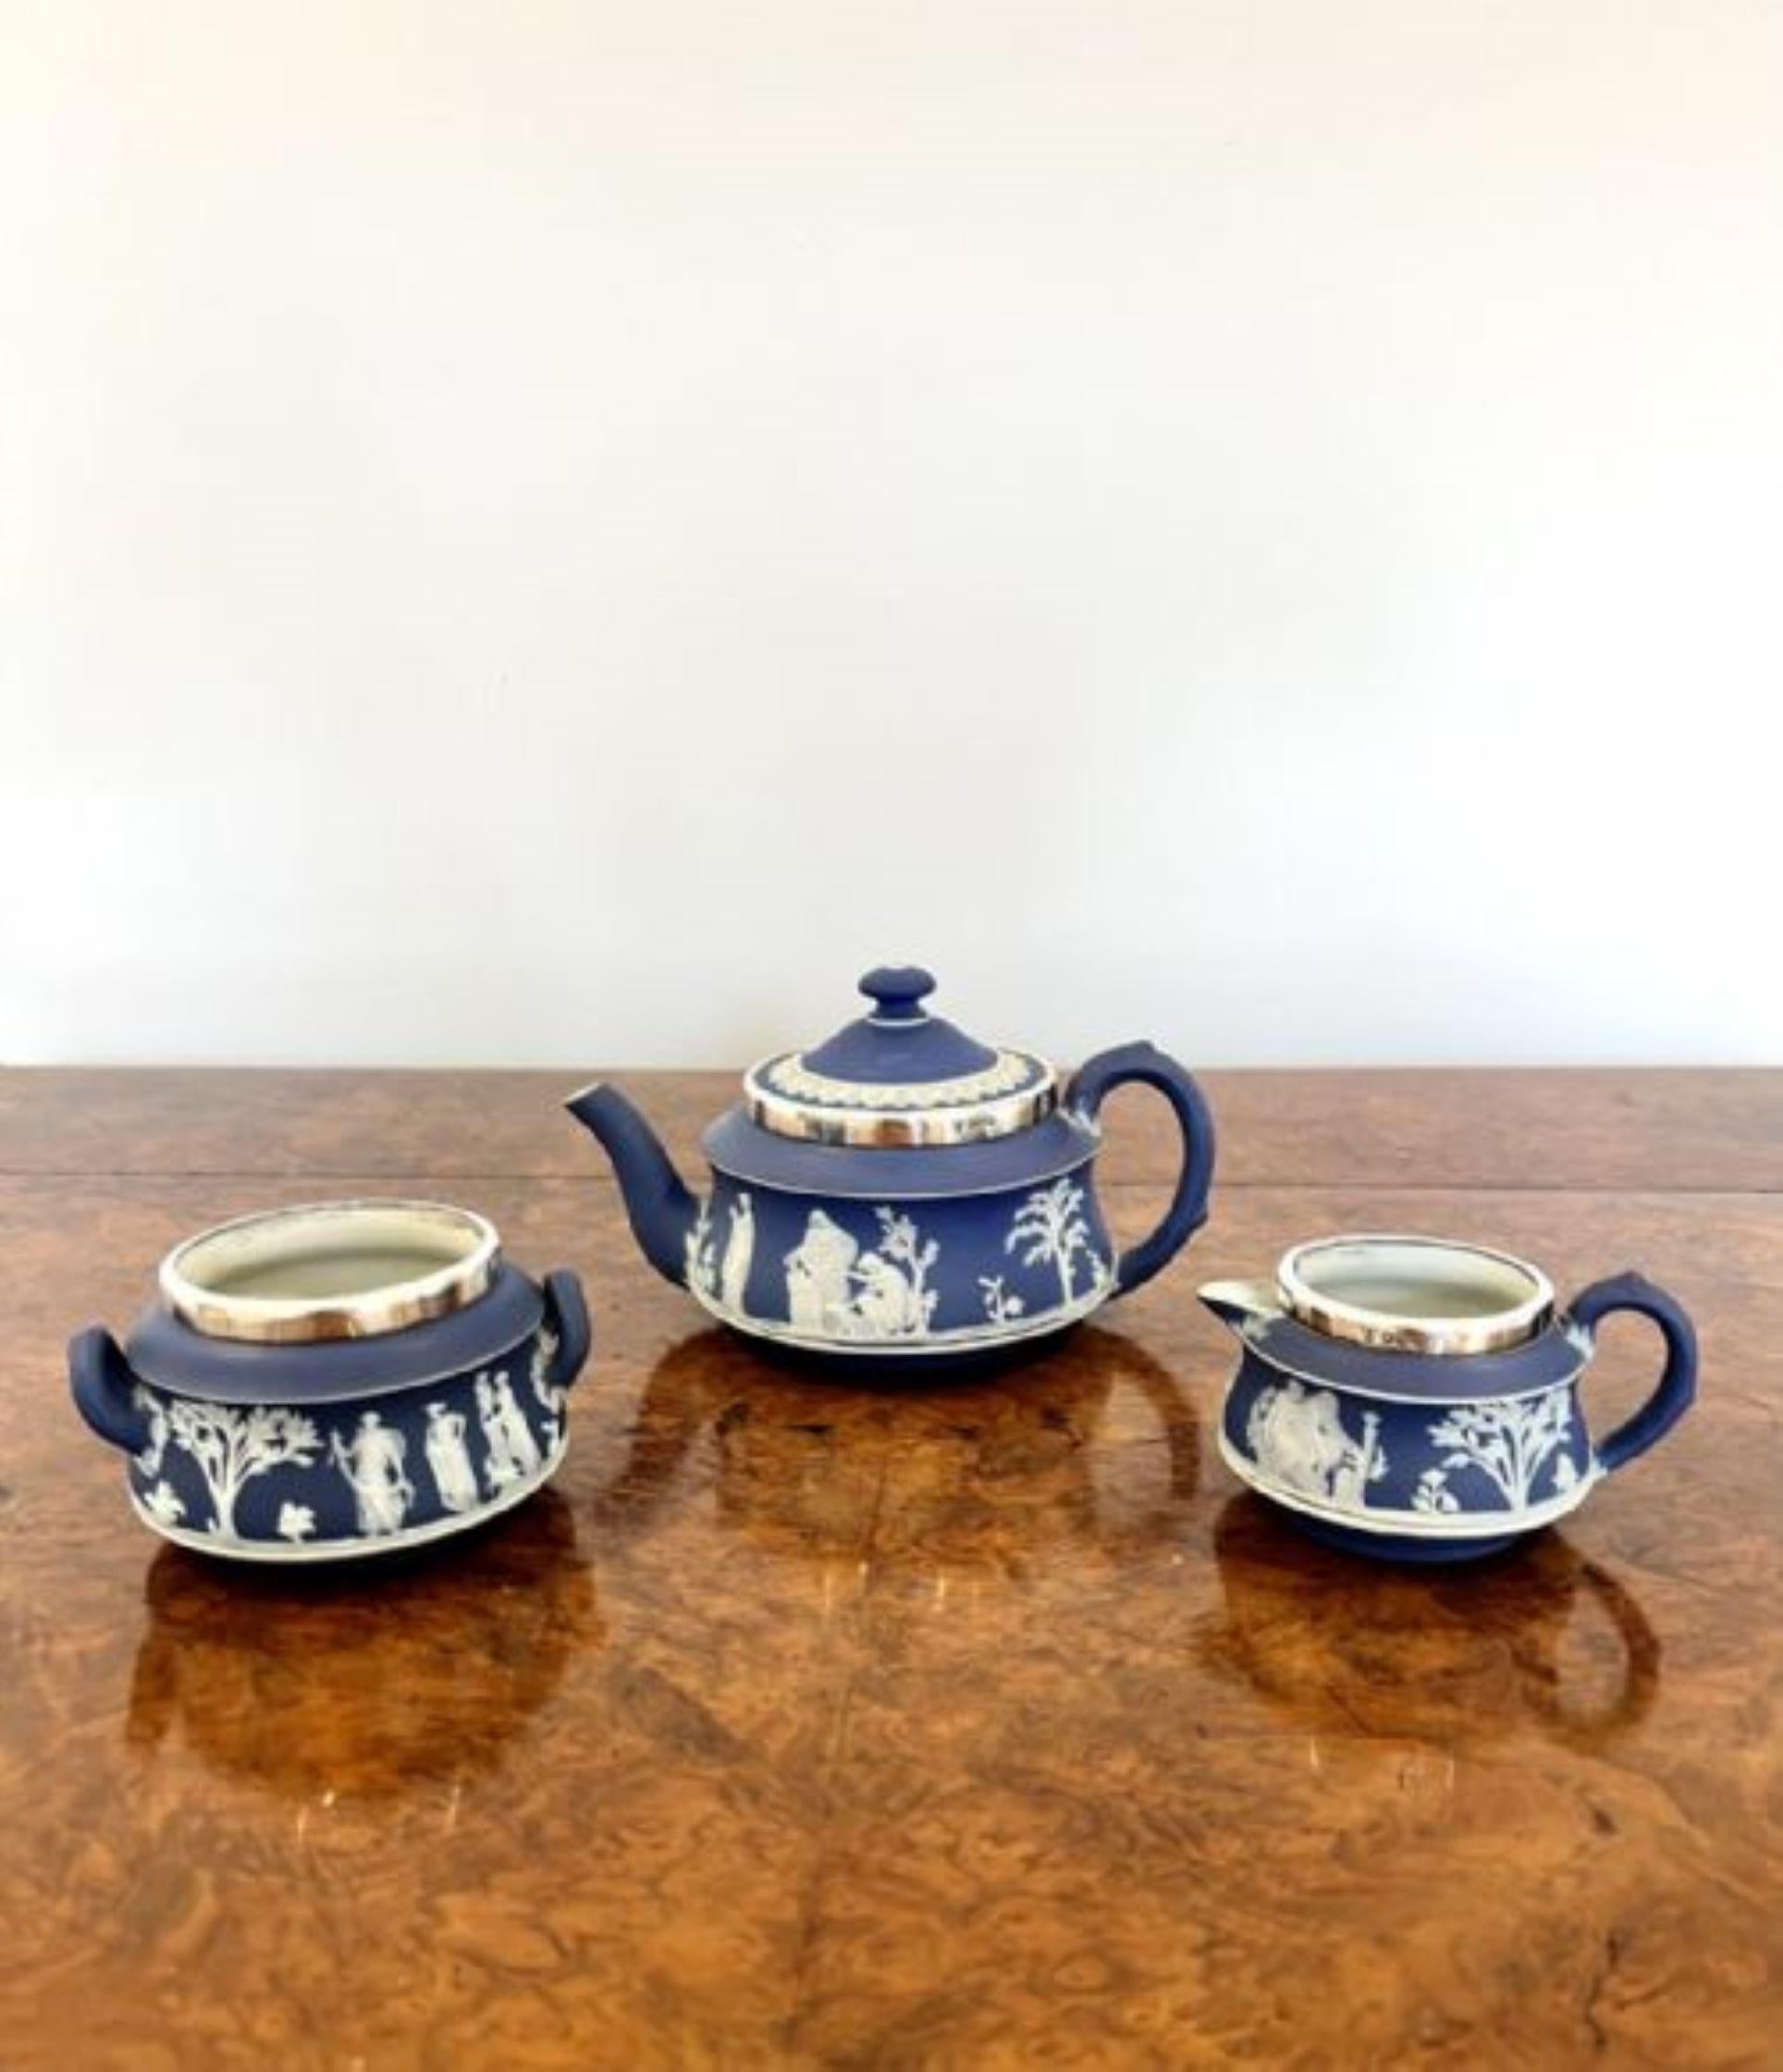 Quality antique Victorian silver mounted three piece Jasperware Wedgwood tea set For Sale 2